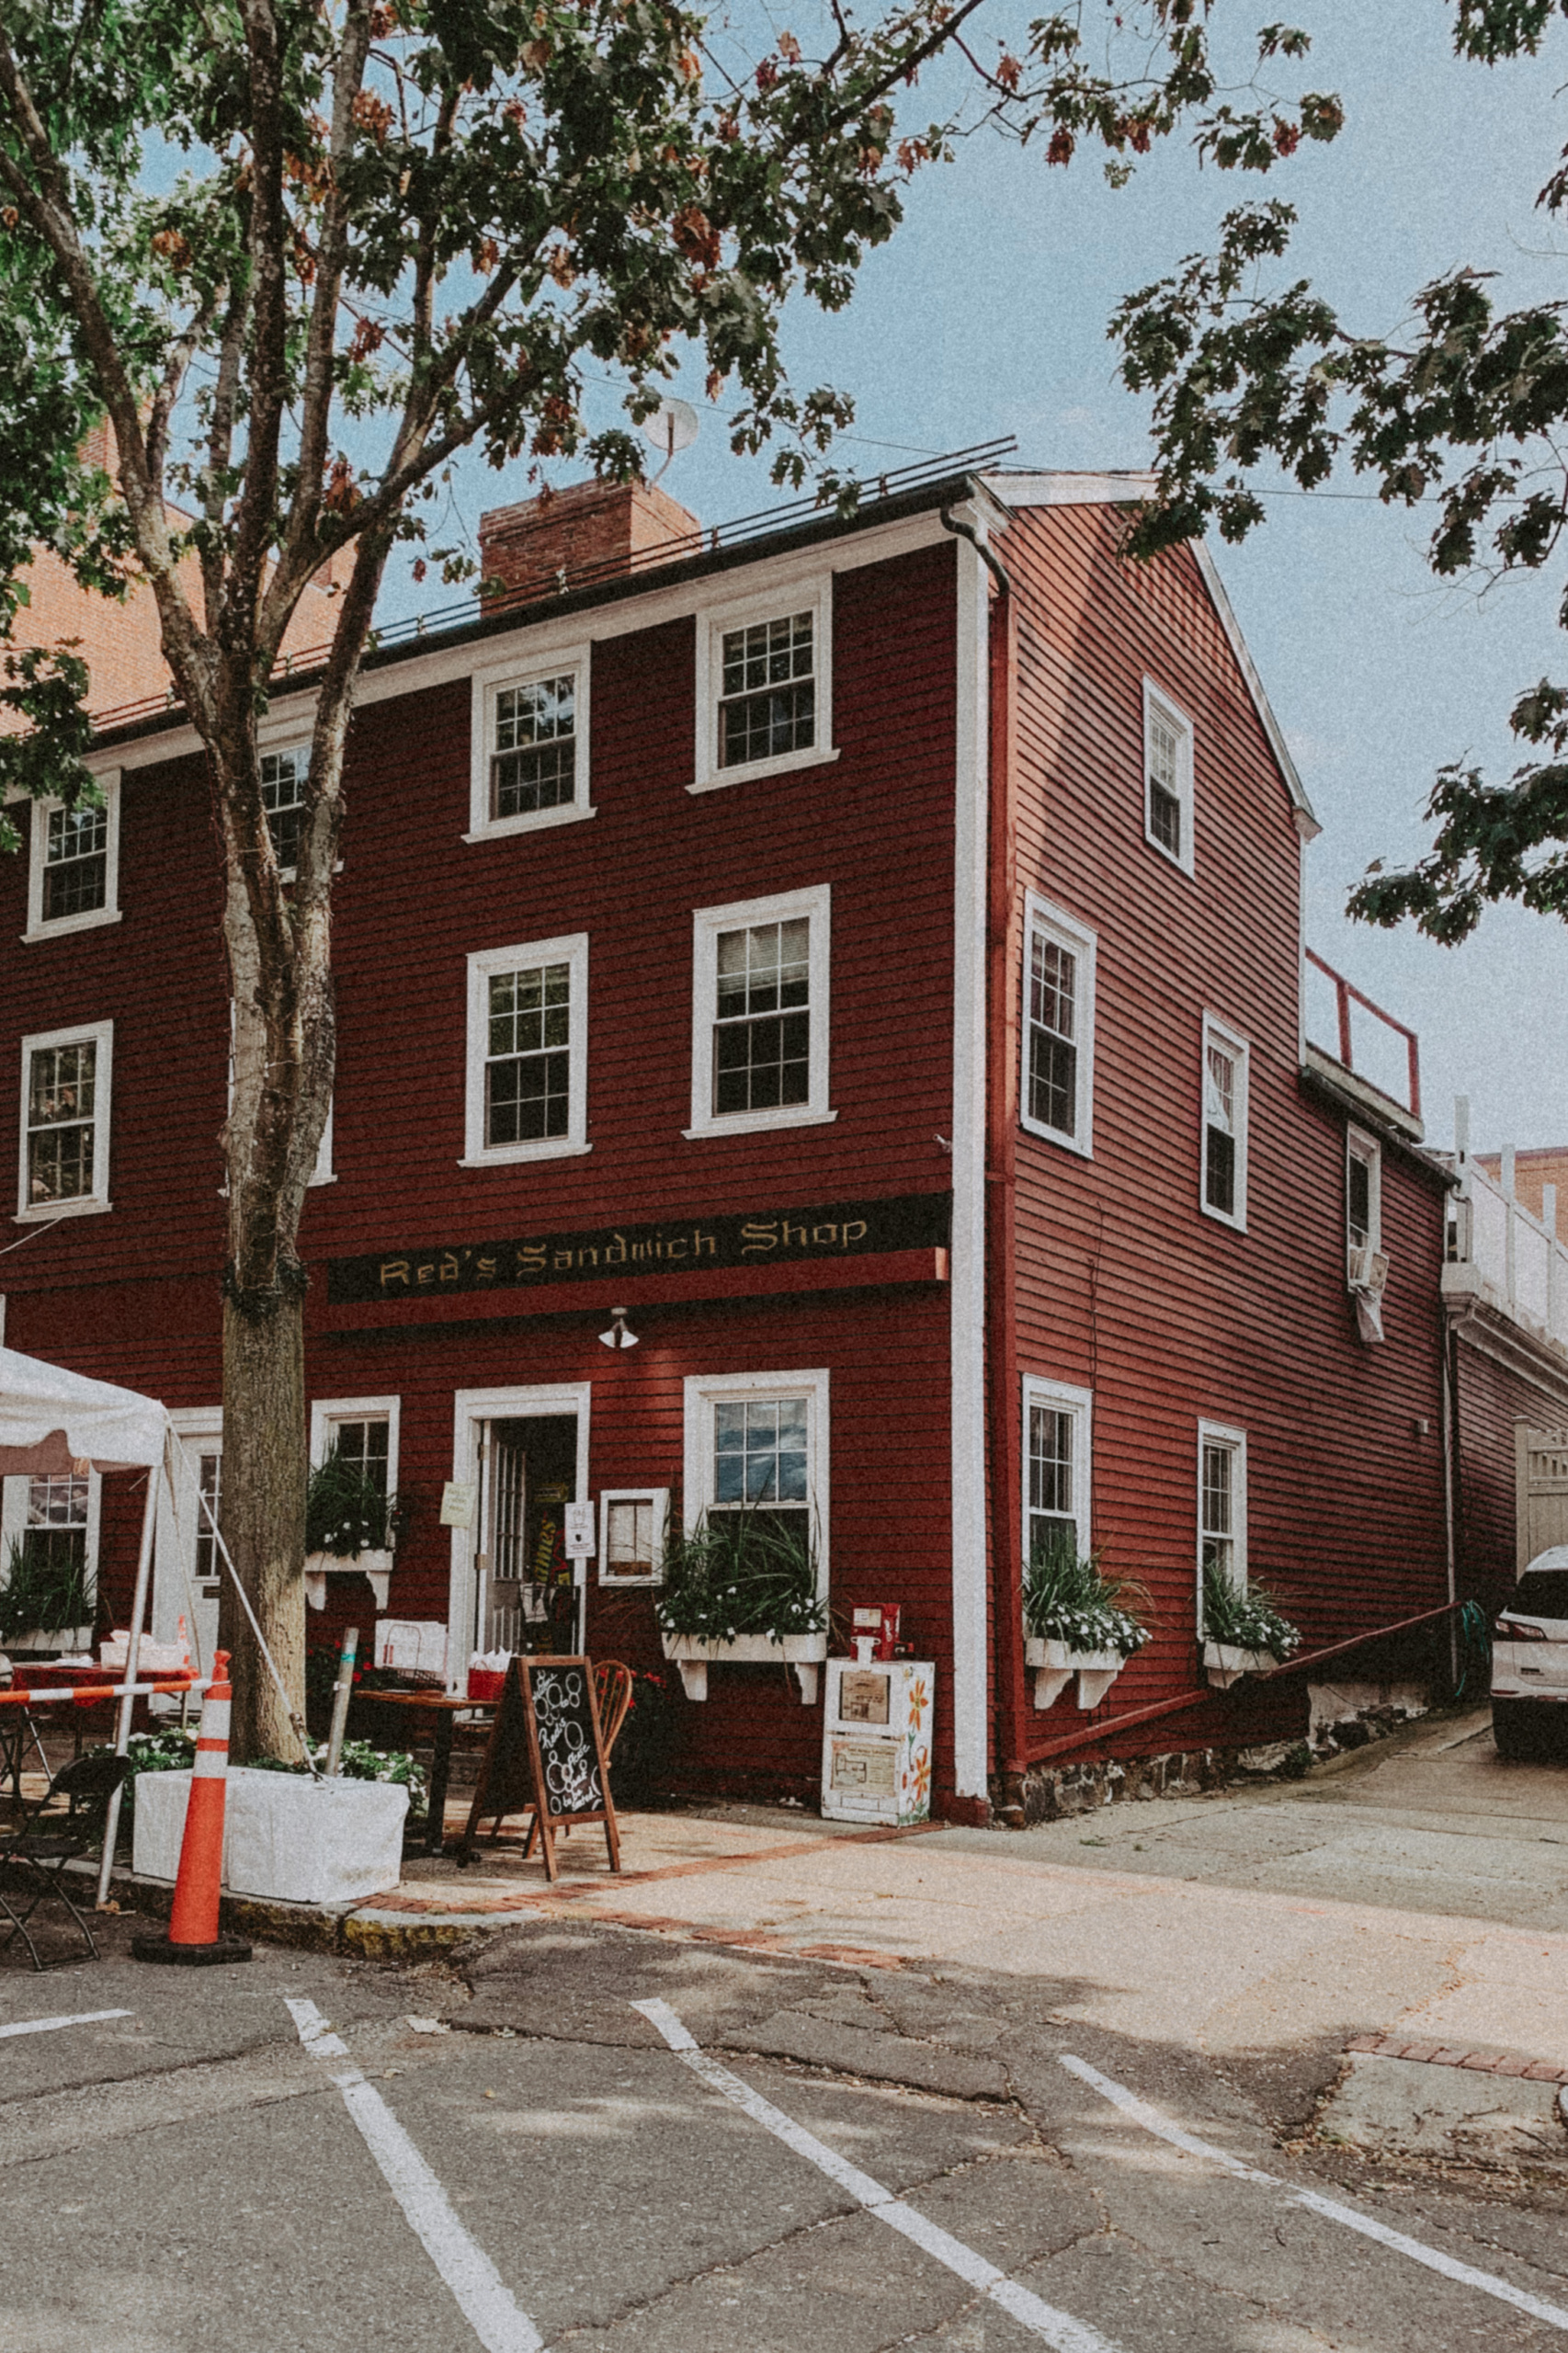 Overnight Stay in Massachusetts - Salem, MA & Lexington, MA -- Reds Sandwich Shop in Salem Massachusetts - Simply by Simone - Simone Piliero Arena #salem #salemma #salemmassachusetts #newengland #newenglandtravel #halloween #falltravel #northeasttravel #travel #travelguide #witchhouse #witches